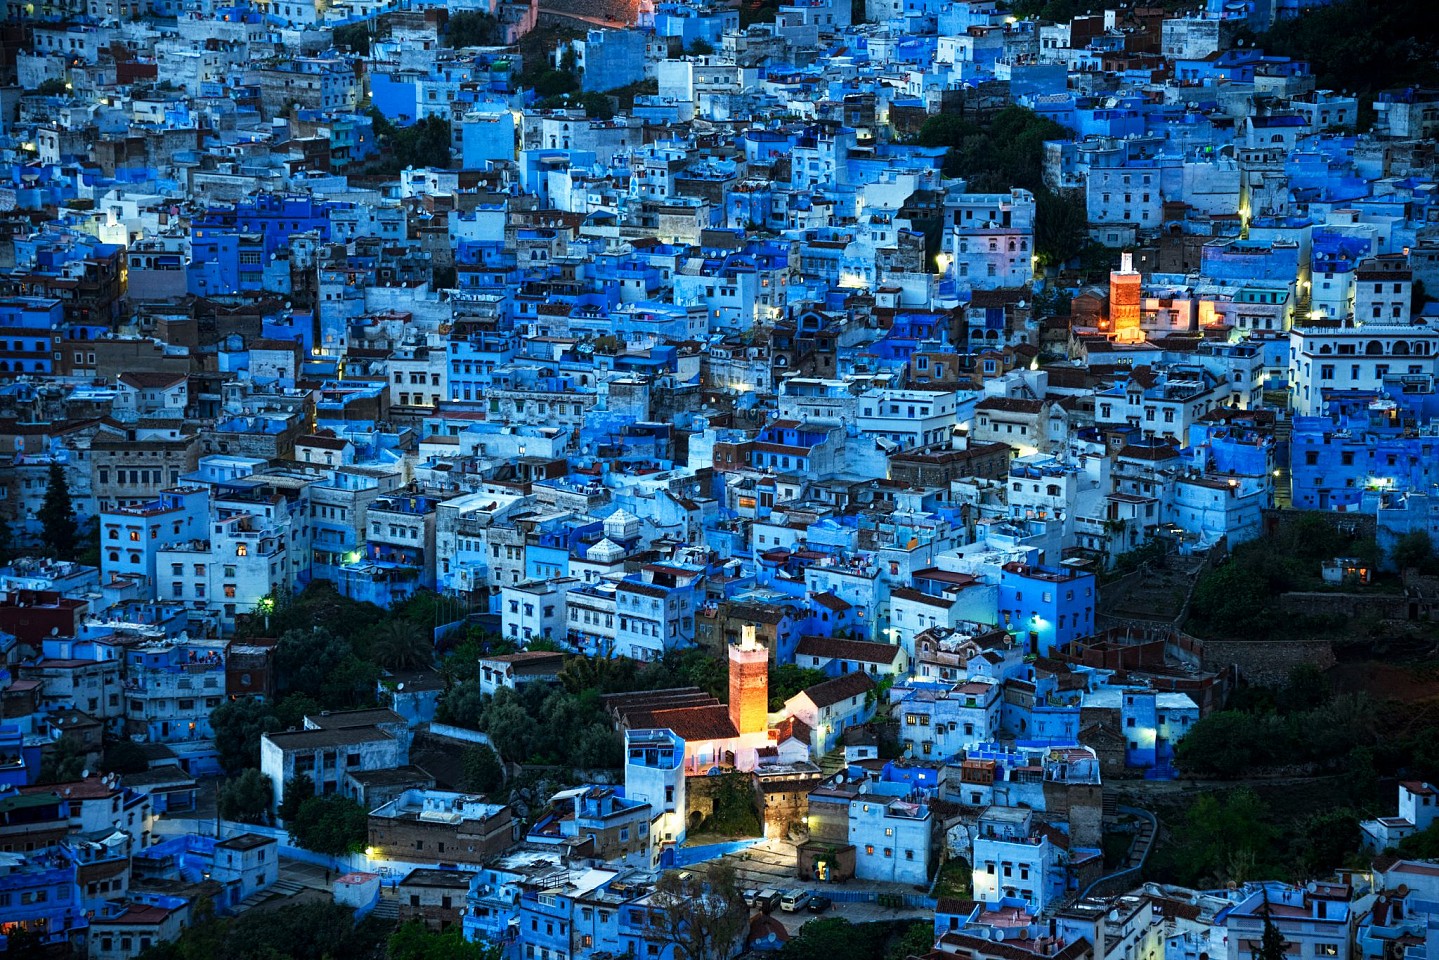 Steve McCurry, Chefchaouen, Morocco, 2016
FujiFlex Crystal Archive Print, 20 x 24 in. (Inquire for additional sizes)
MOROCCO-10218